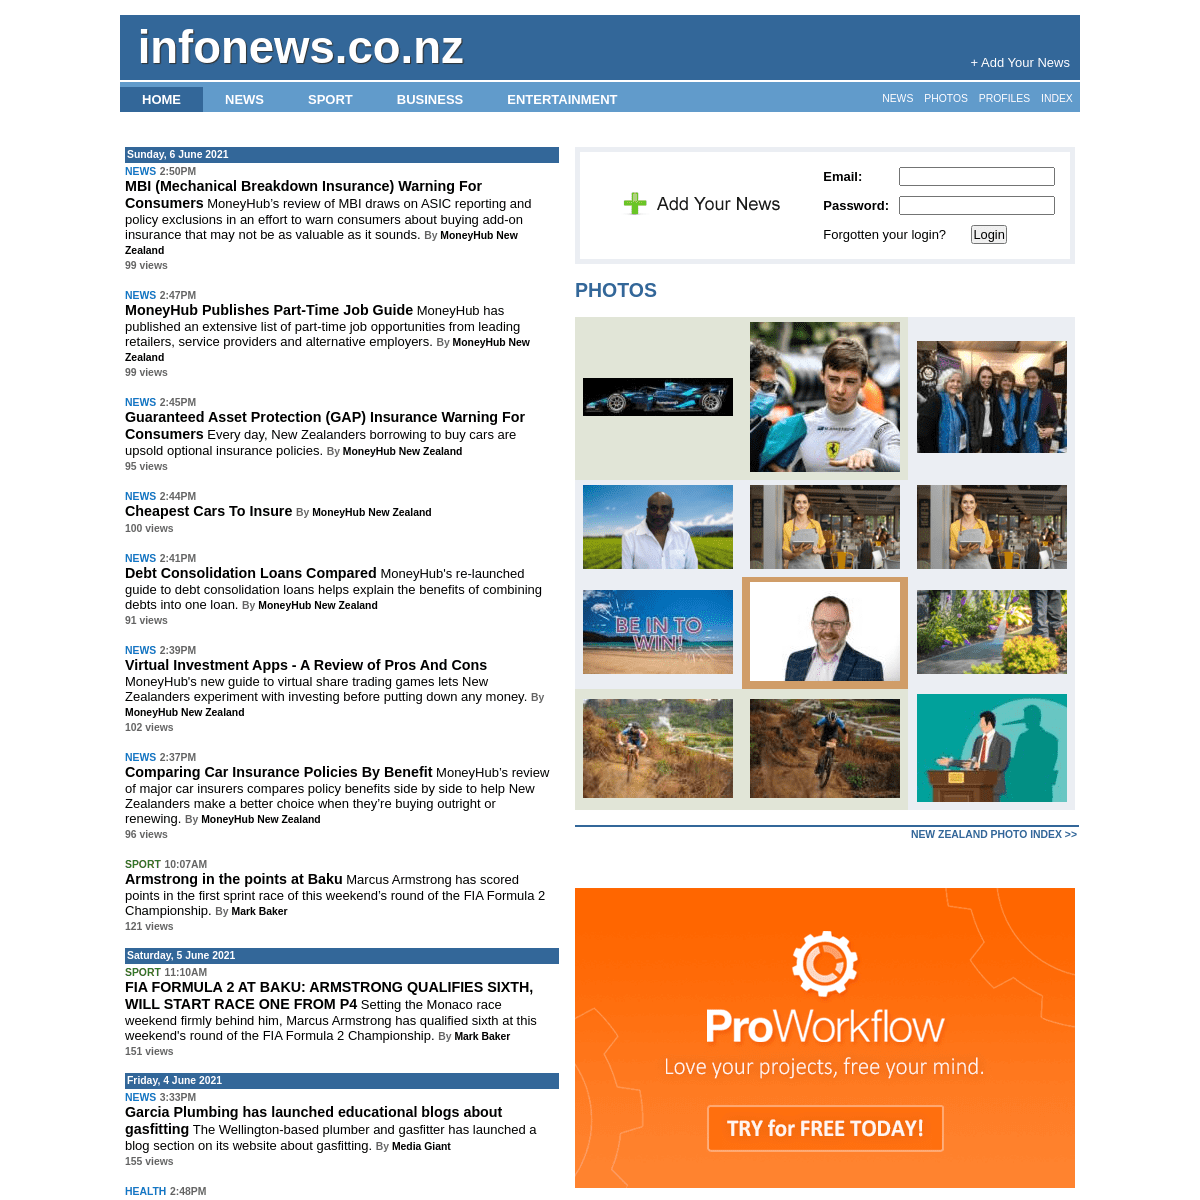 A complete backup of https://infonews.co.nz